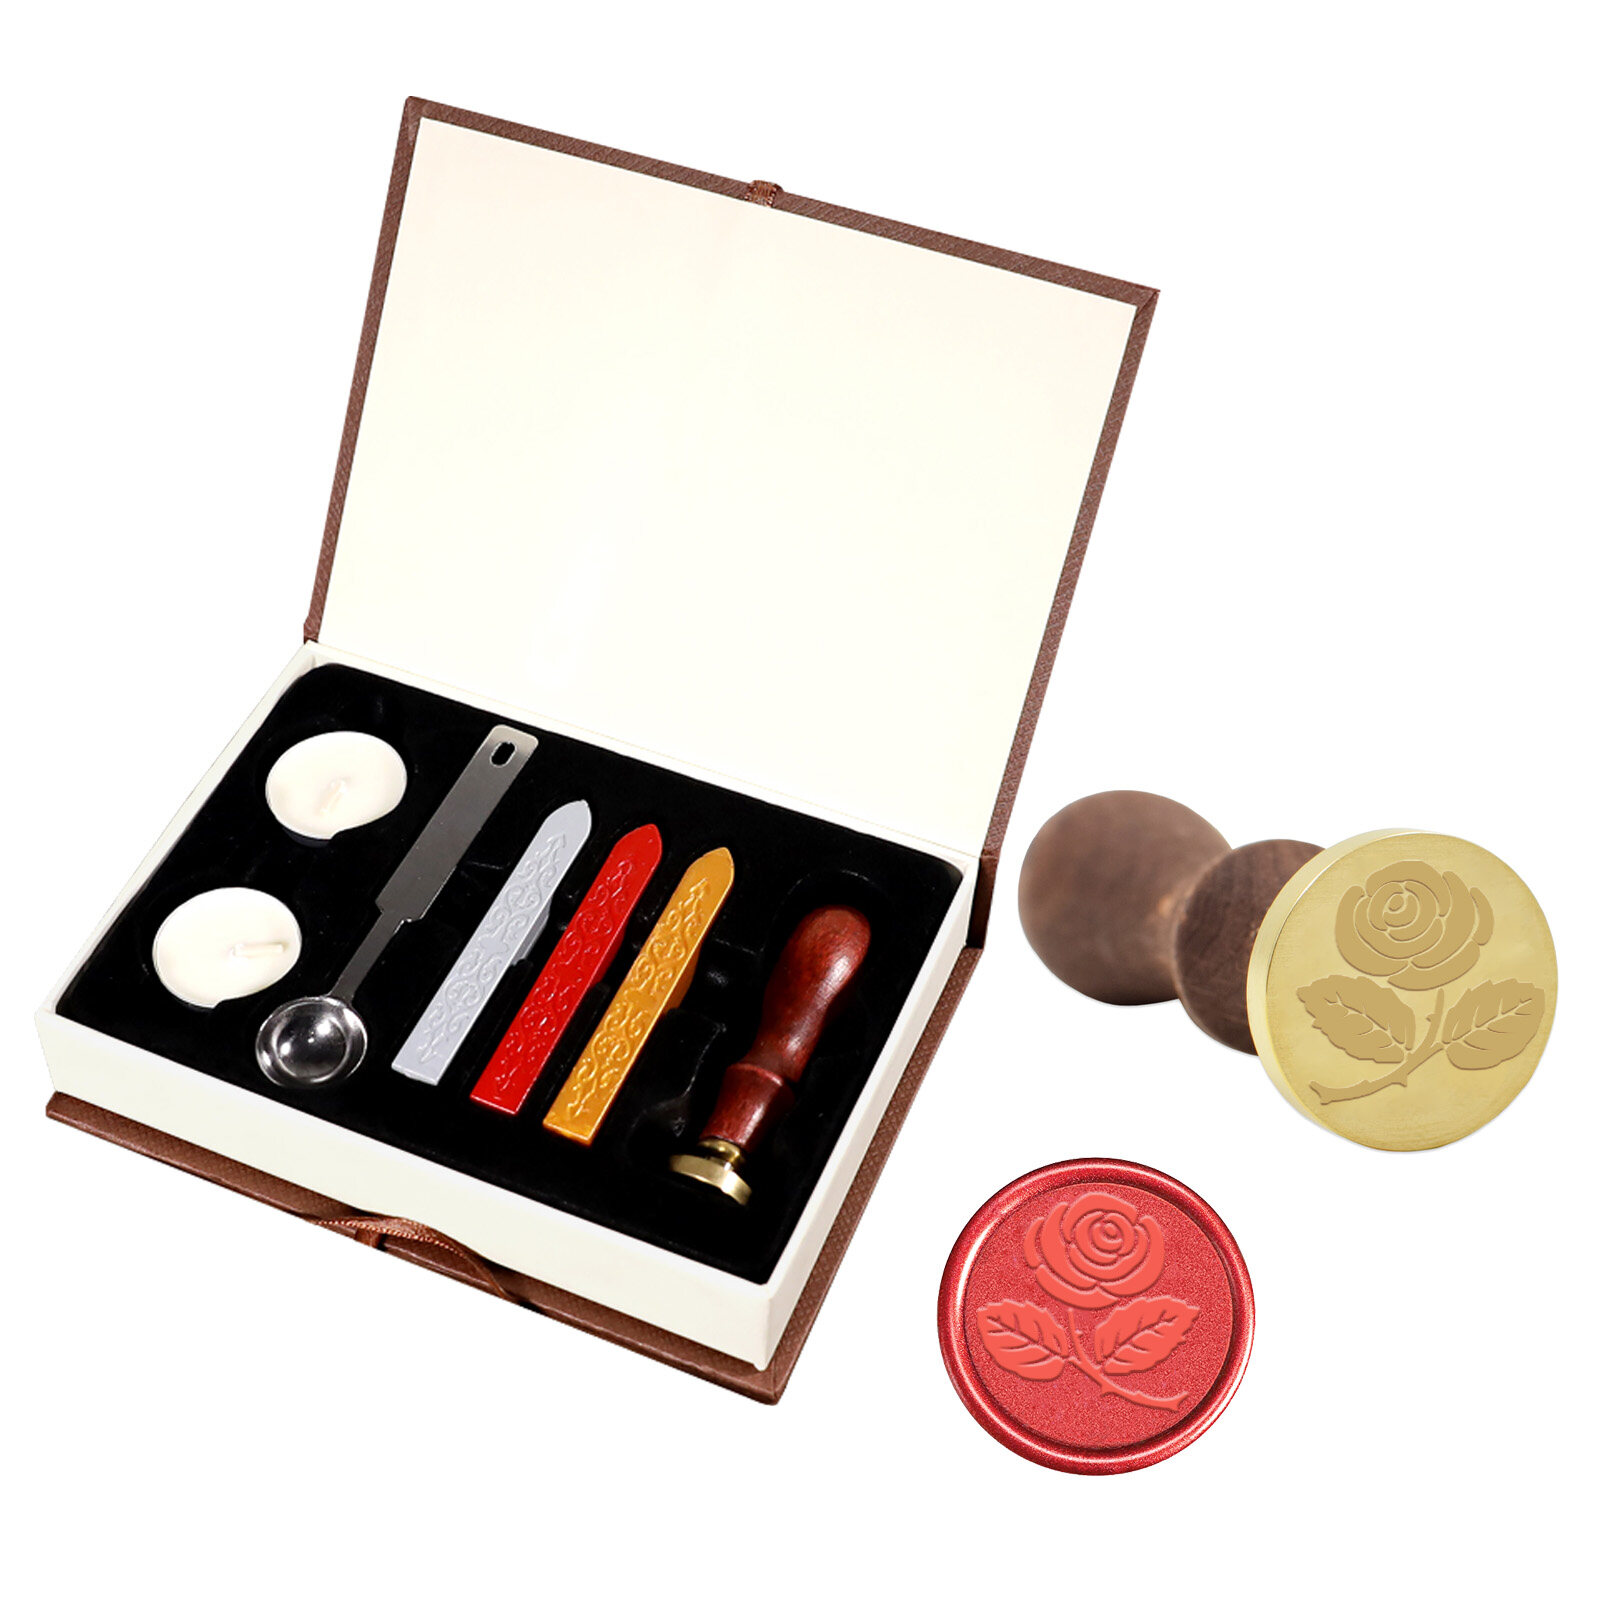 A Wax Seal Stamp Kit Classic Vintage Seal Wax Set for Stamps Envelope Postcard Label Party Invitation 